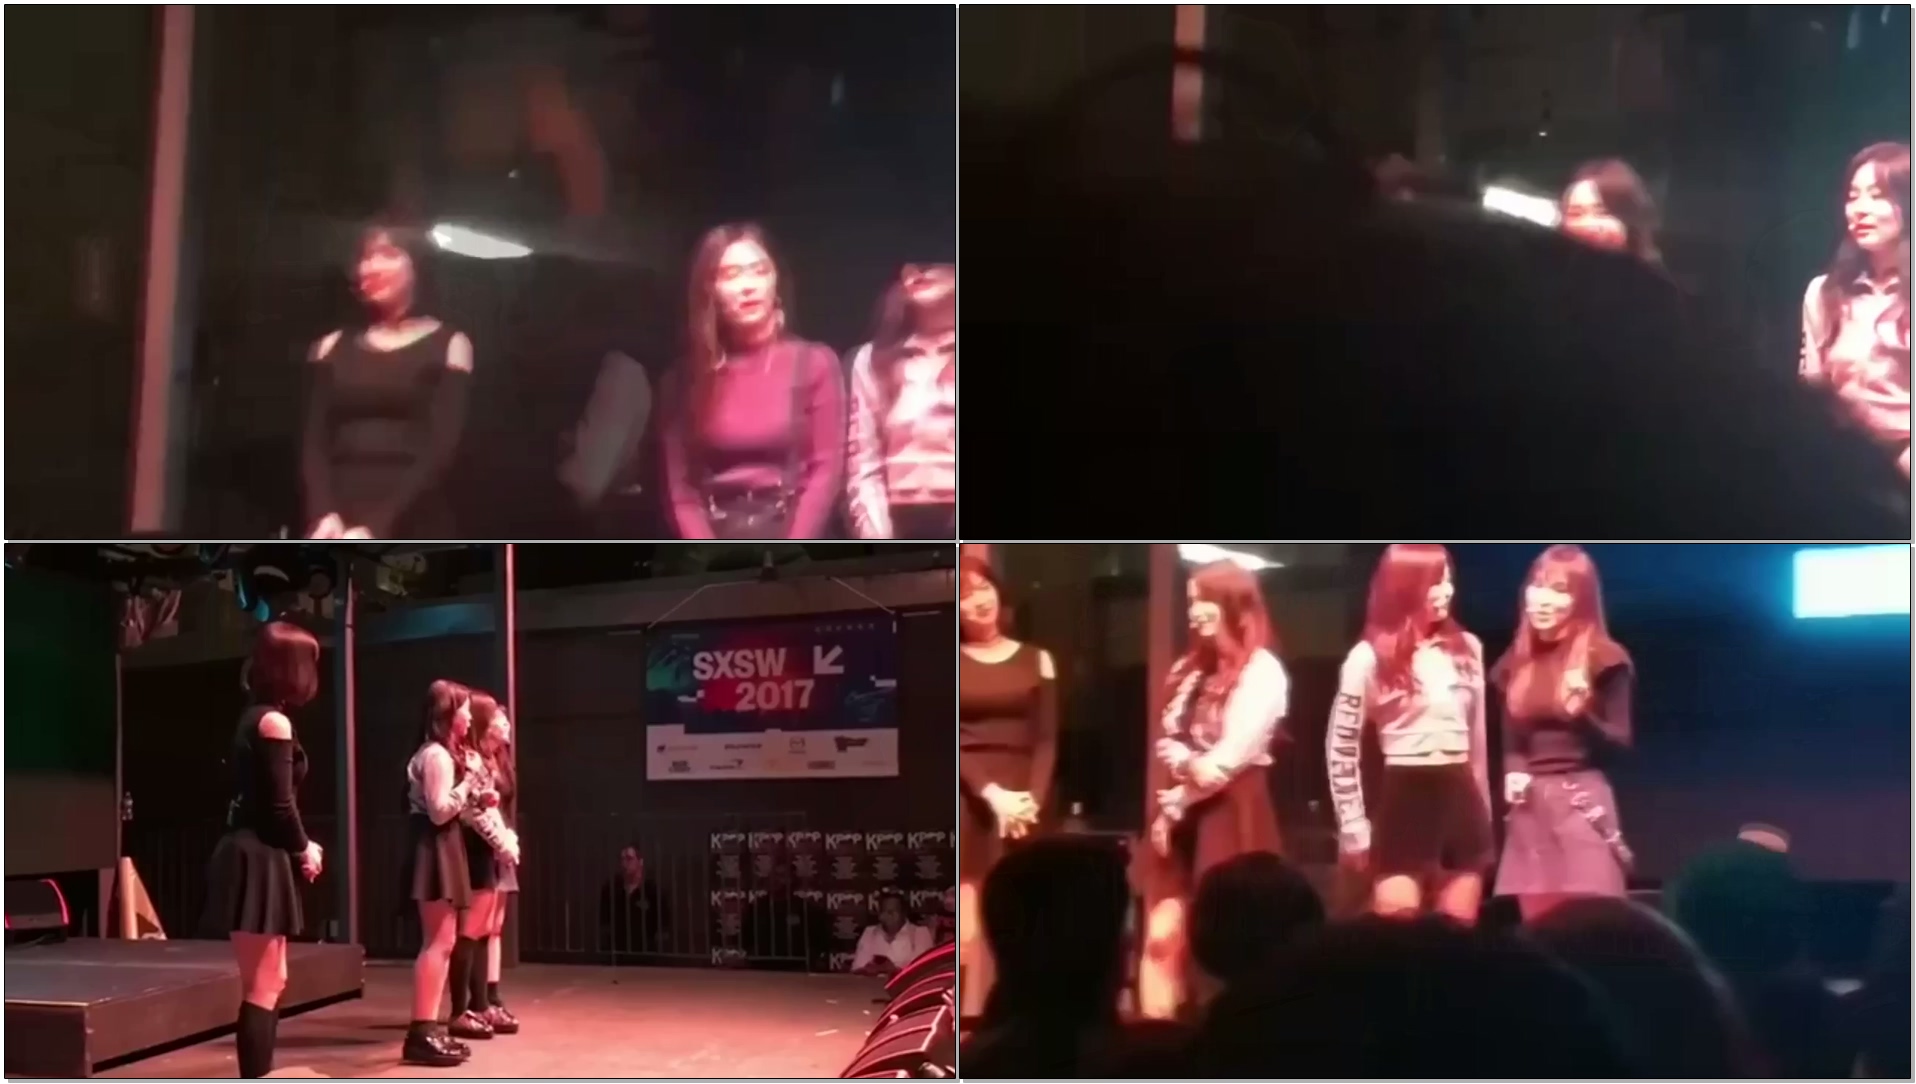 170317 SXSW 2017 Kpop Night Out - Red Velvet 레드벨벳 Ment/Talk